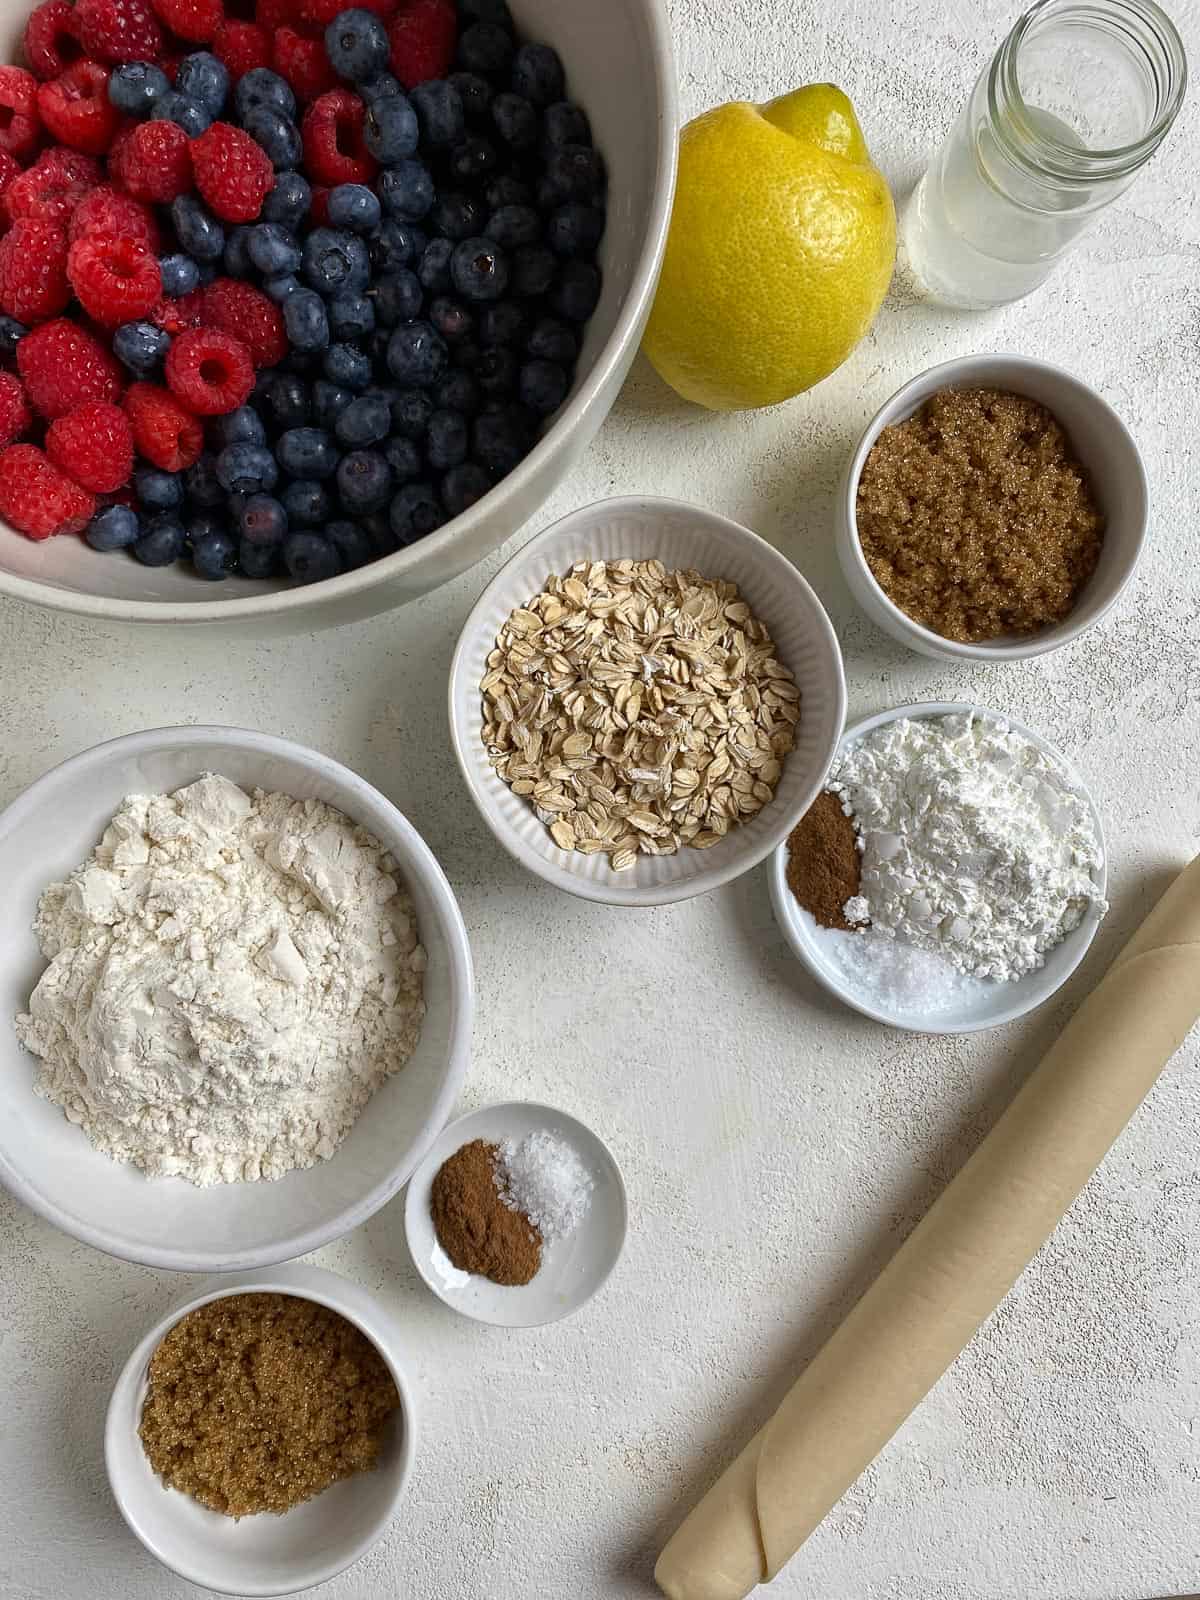 ingredients for Mixed Berry Crumb Pie measured out on a white surface